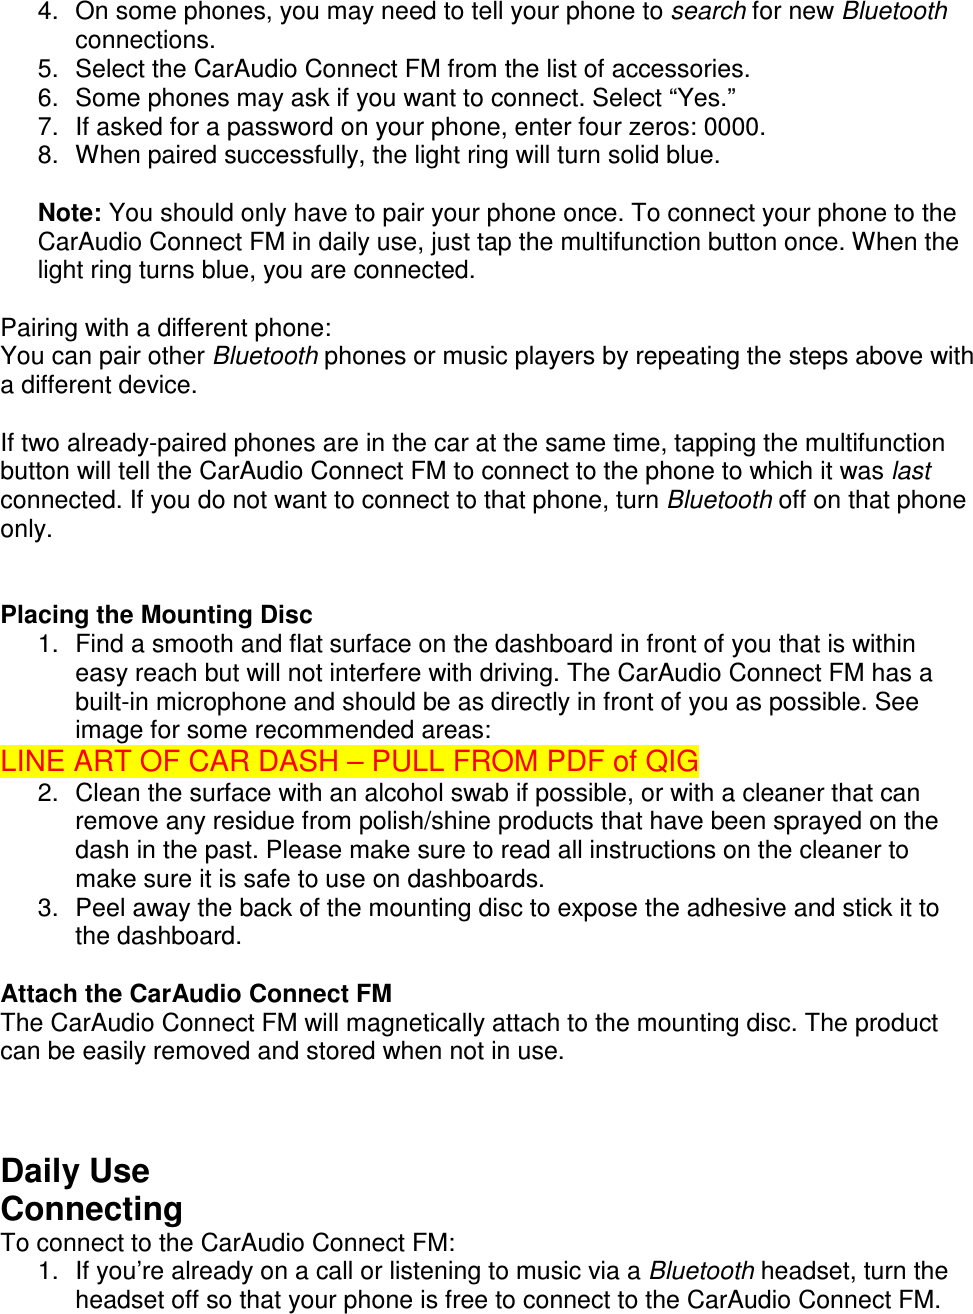  4.  On some phones, you may need to tell your phone to search for new Bluetooth connections. 5.  Select the CarAudio Connect FM from the list of accessories. 6.  Some phones may ask if you want to connect. Select “Yes.” 7.  If asked for a password on your phone, enter four zeros: 0000. 8.  When paired successfully, the light ring will turn solid blue.  Note: You should only have to pair your phone once. To connect your phone to the CarAudio Connect FM in daily use, just tap the multifunction button once. When the light ring turns blue, you are connected.  Pairing with a different phone: You can pair other Bluetooth phones or music players by repeating the steps above with a different device.   If two already-paired phones are in the car at the same time, tapping the multifunction button will tell the CarAudio Connect FM to connect to the phone to which it was last connected. If you do not want to connect to that phone, turn Bluetooth off on that phone only.   Placing the Mounting Disc 1.  Find a smooth and flat surface on the dashboard in front of you that is within easy reach but will not interfere with driving. The CarAudio Connect FM has a built-in microphone and should be as directly in front of you as possible. See image for some recommended areas: LINE ART OF CAR DASH – PULL FROM PDF of QIG 2.  Clean the surface with an alcohol swab if possible, or with a cleaner that can remove any residue from polish/shine products that have been sprayed on the dash in the past. Please make sure to read all instructions on the cleaner to make sure it is safe to use on dashboards. 3.  Peel away the back of the mounting disc to expose the adhesive and stick it to the dashboard.  Attach the CarAudio Connect FM The CarAudio Connect FM will magnetically attach to the mounting disc. The product can be easily removed and stored when not in use.    Daily Use Connecting To connect to the CarAudio Connect FM: 1.  If you’re already on a call or listening to music via a Bluetooth headset, turn the headset off so that your phone is free to connect to the CarAudio Connect FM. 